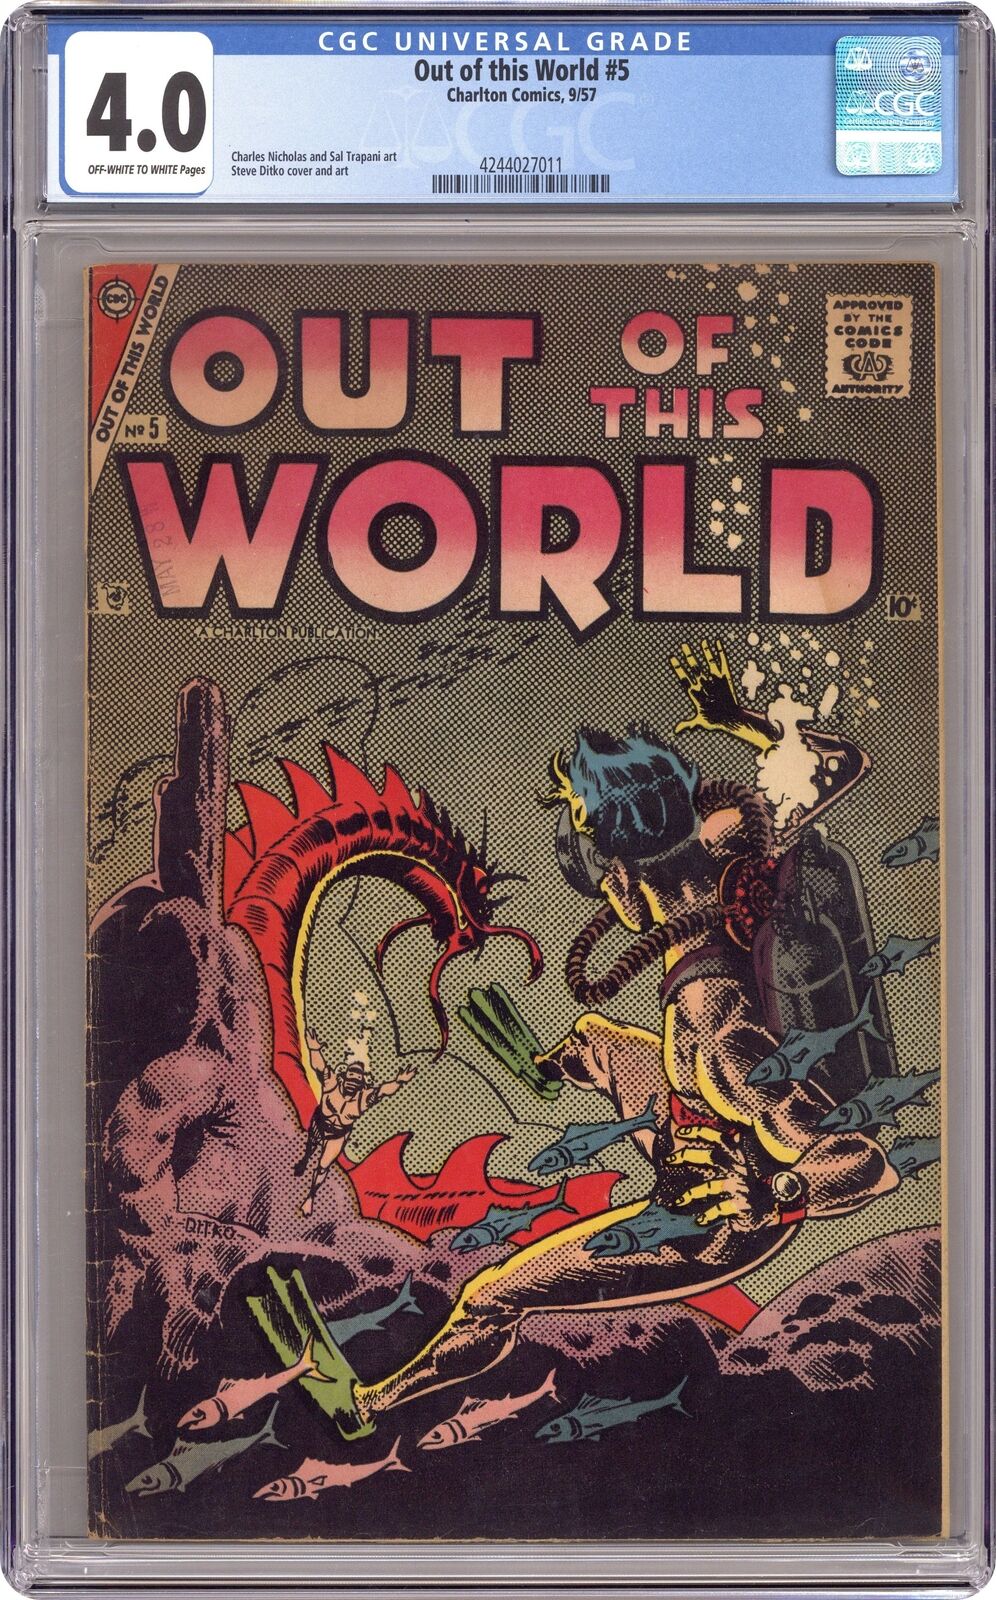 Out of this World #5 CGC 4.0 1957 4244027011